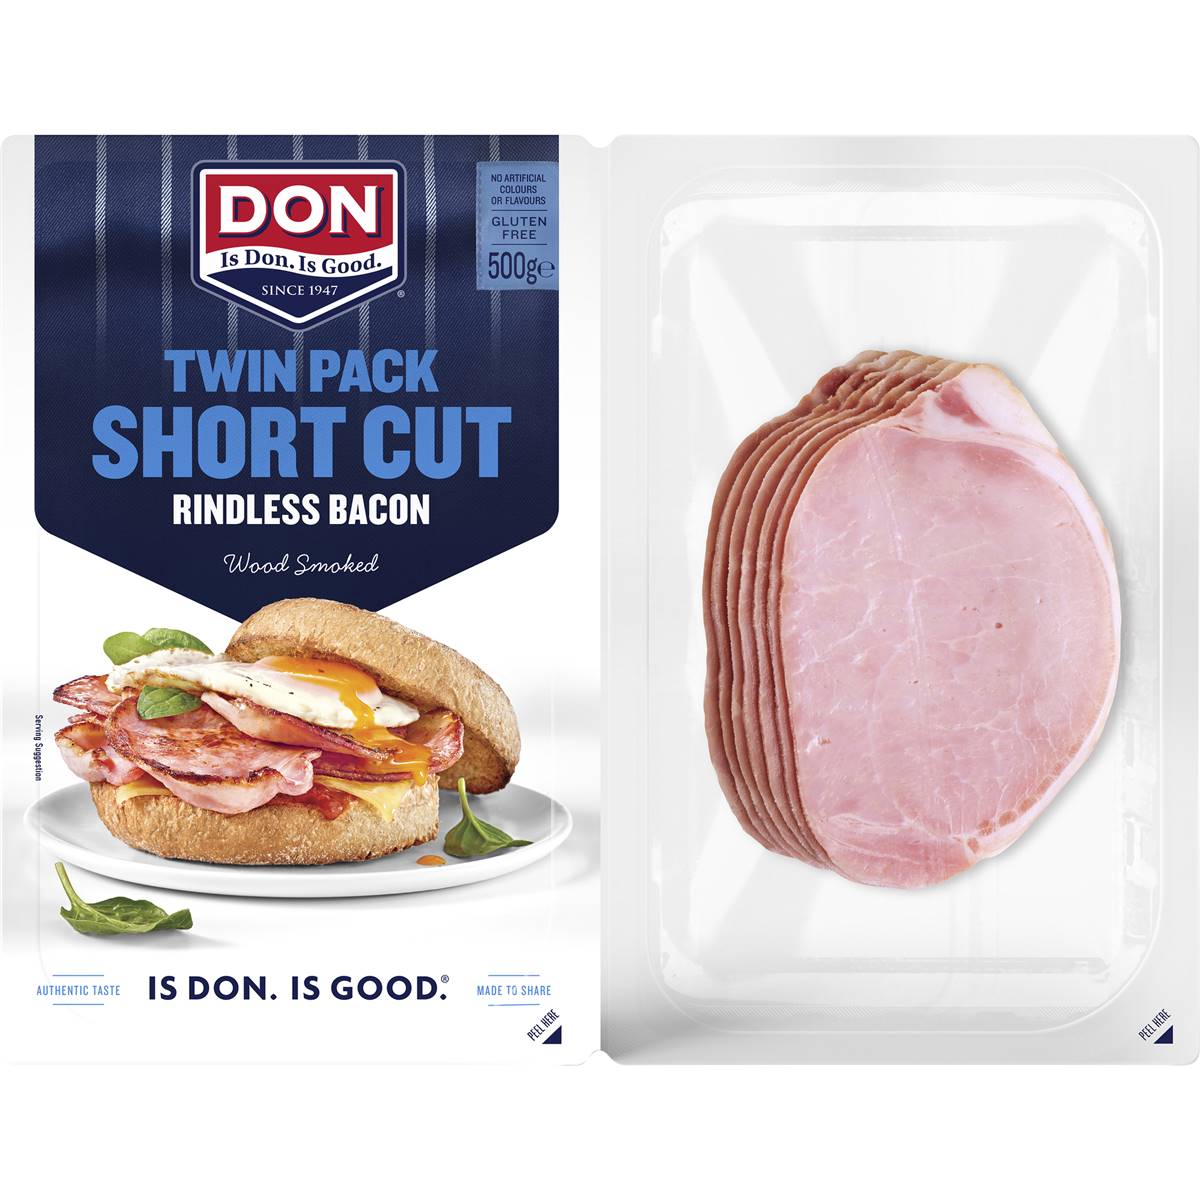 Calories in Don Short Cut Rindless Bacon Twin Pack